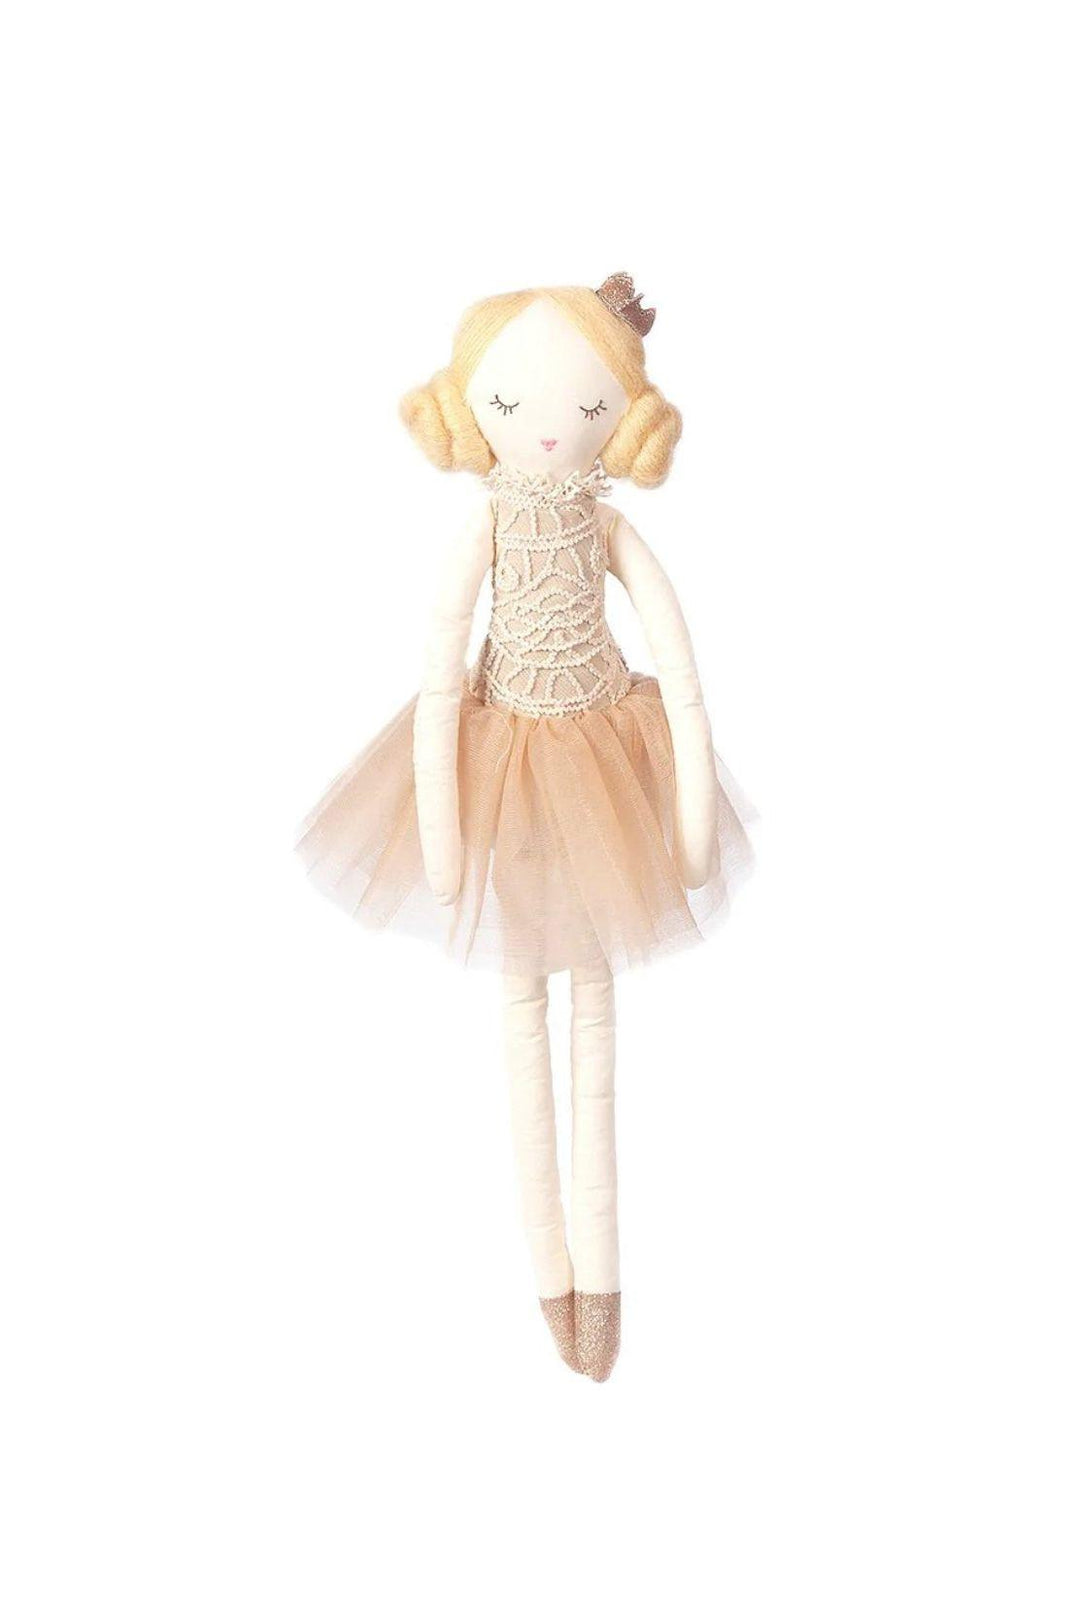 20-Inch Tana, the Tea Party Princess Doll - Crown, Organza Dress & Shimmering Accents - Sophia Rose Children's Boutique